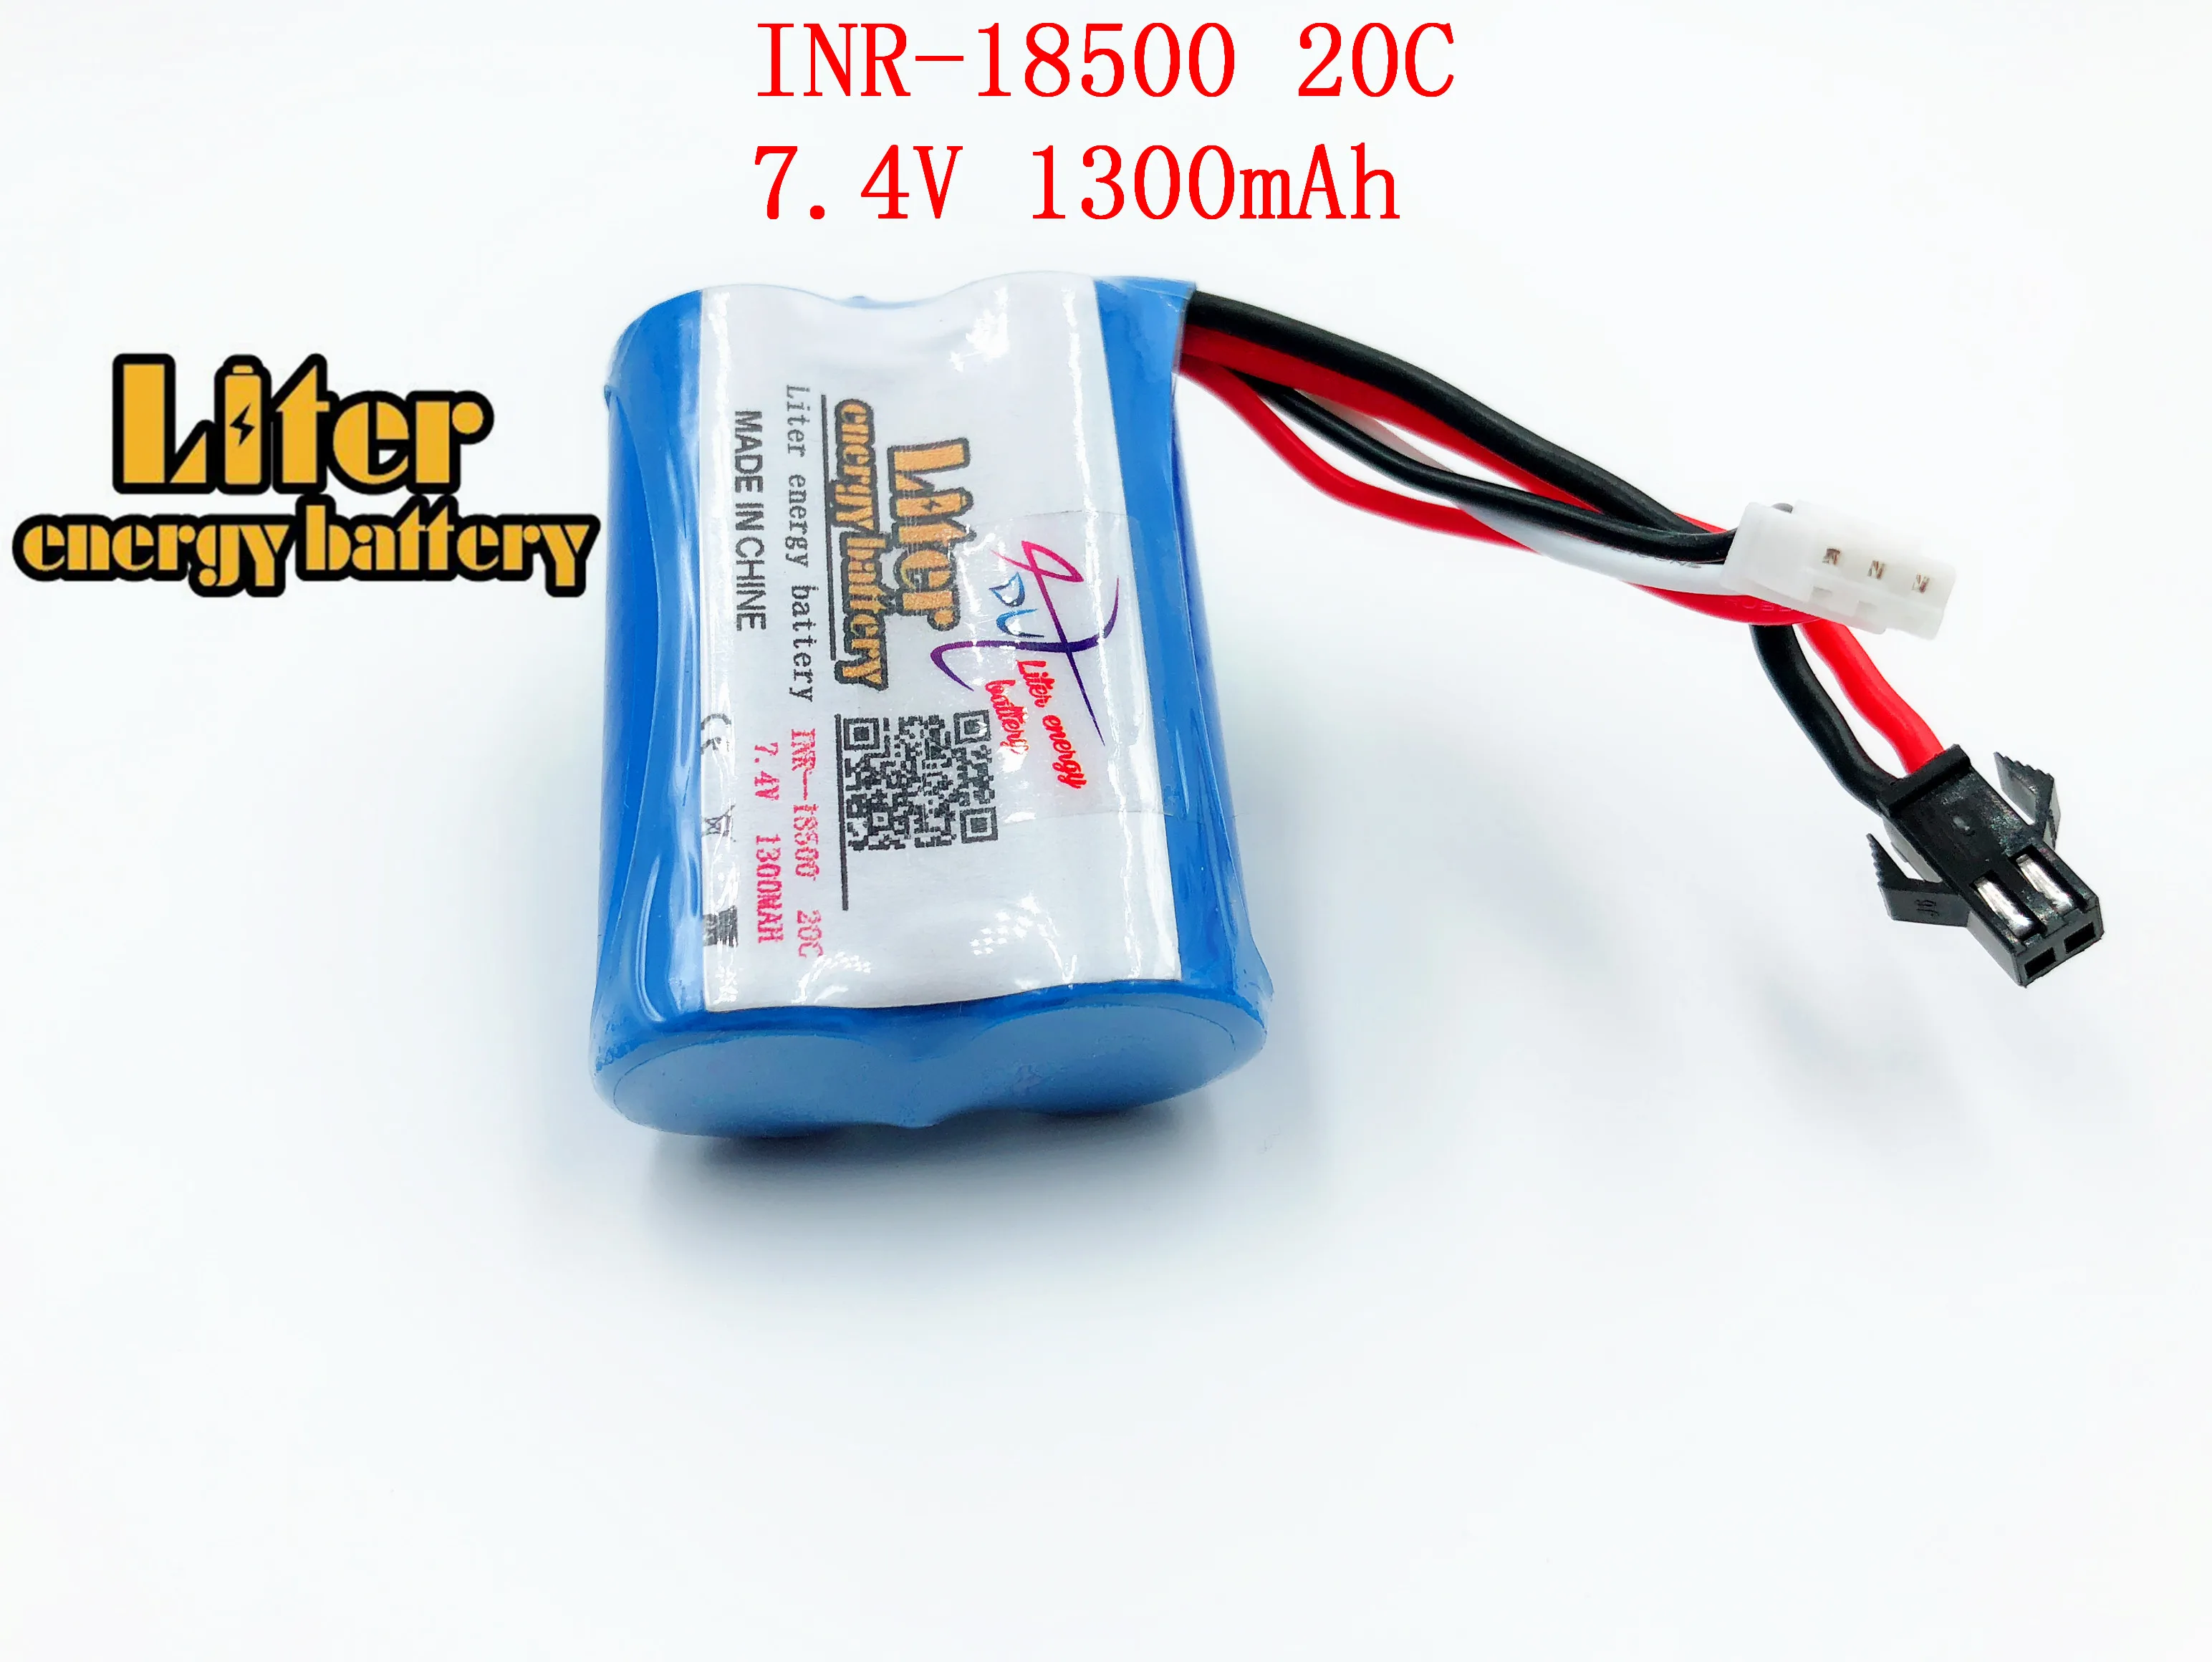 7.4V 1300mAH Lipo Battery For Remote control helicopter Li-po battery 7.4 V 18500 20C discharge toy batteryCylindrical | Электроника